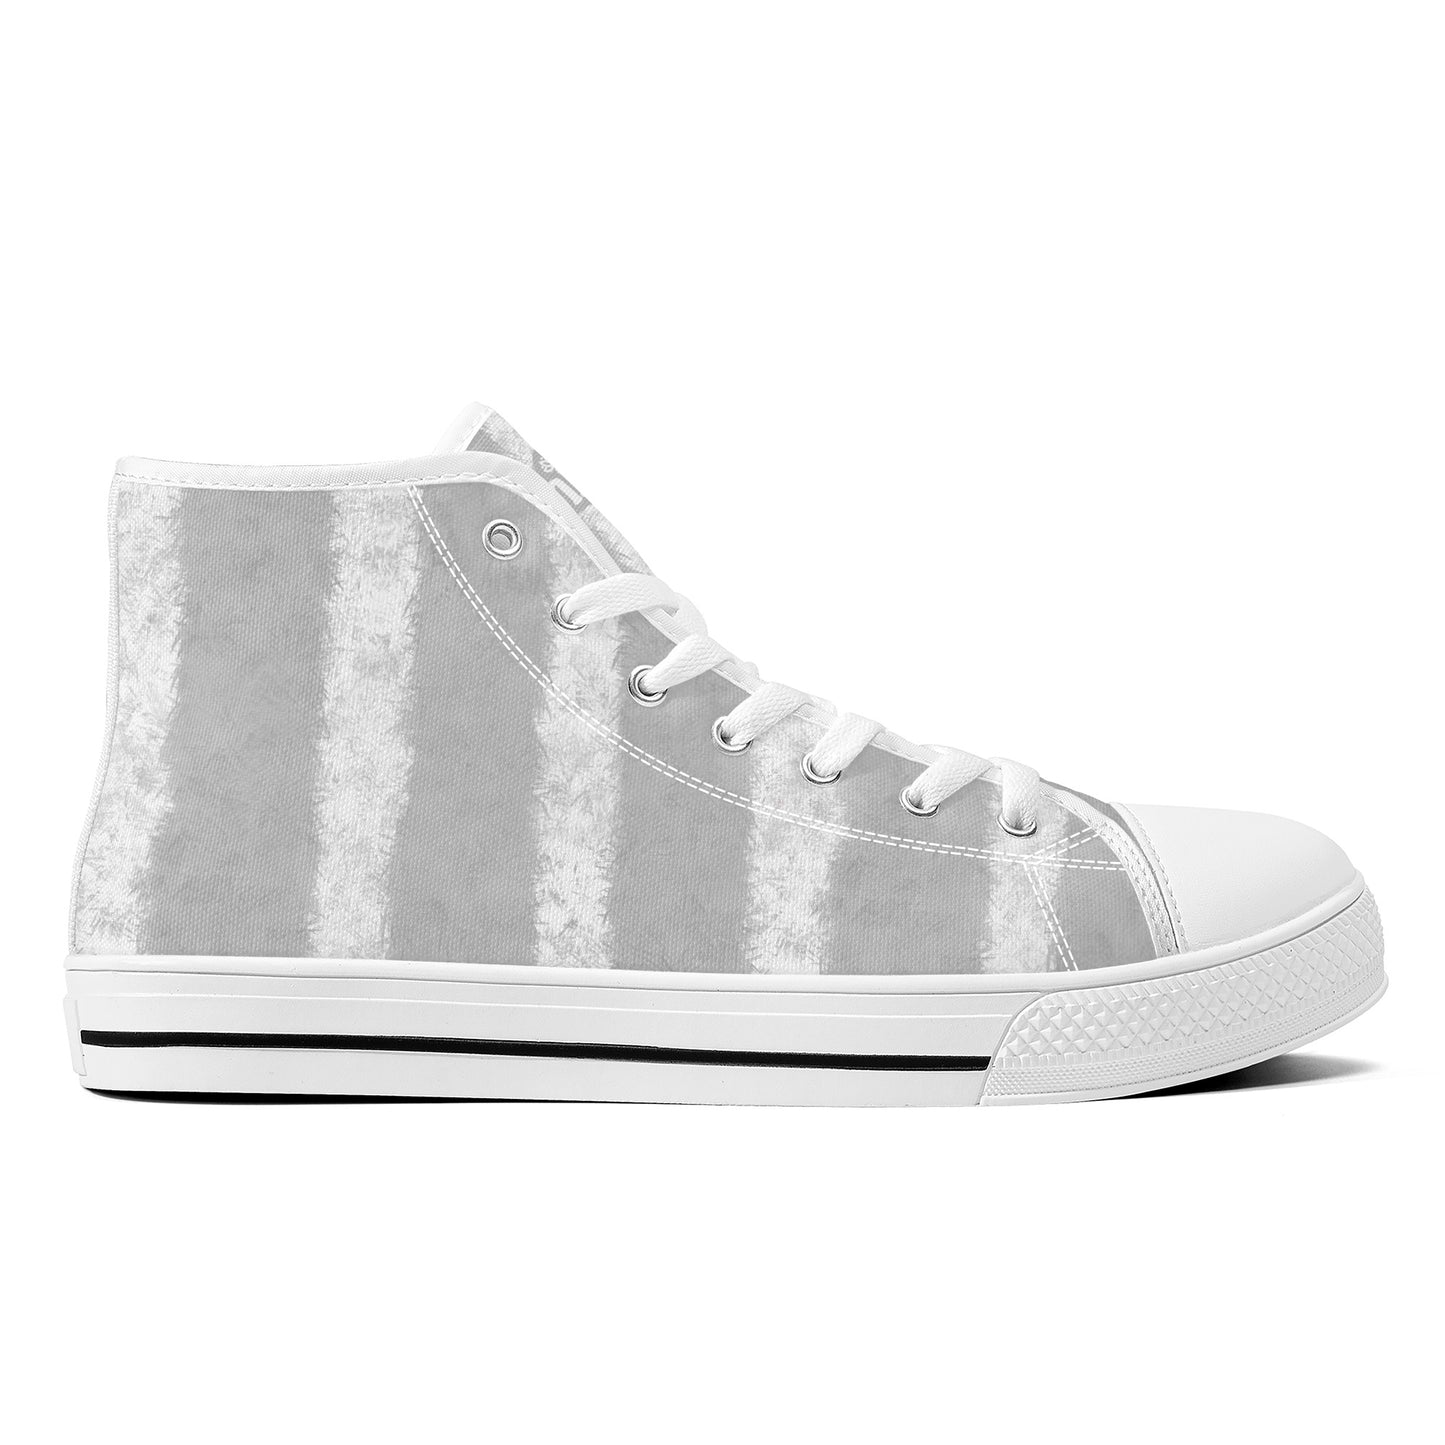 "Nix Plume" High Top Canvas Shoes